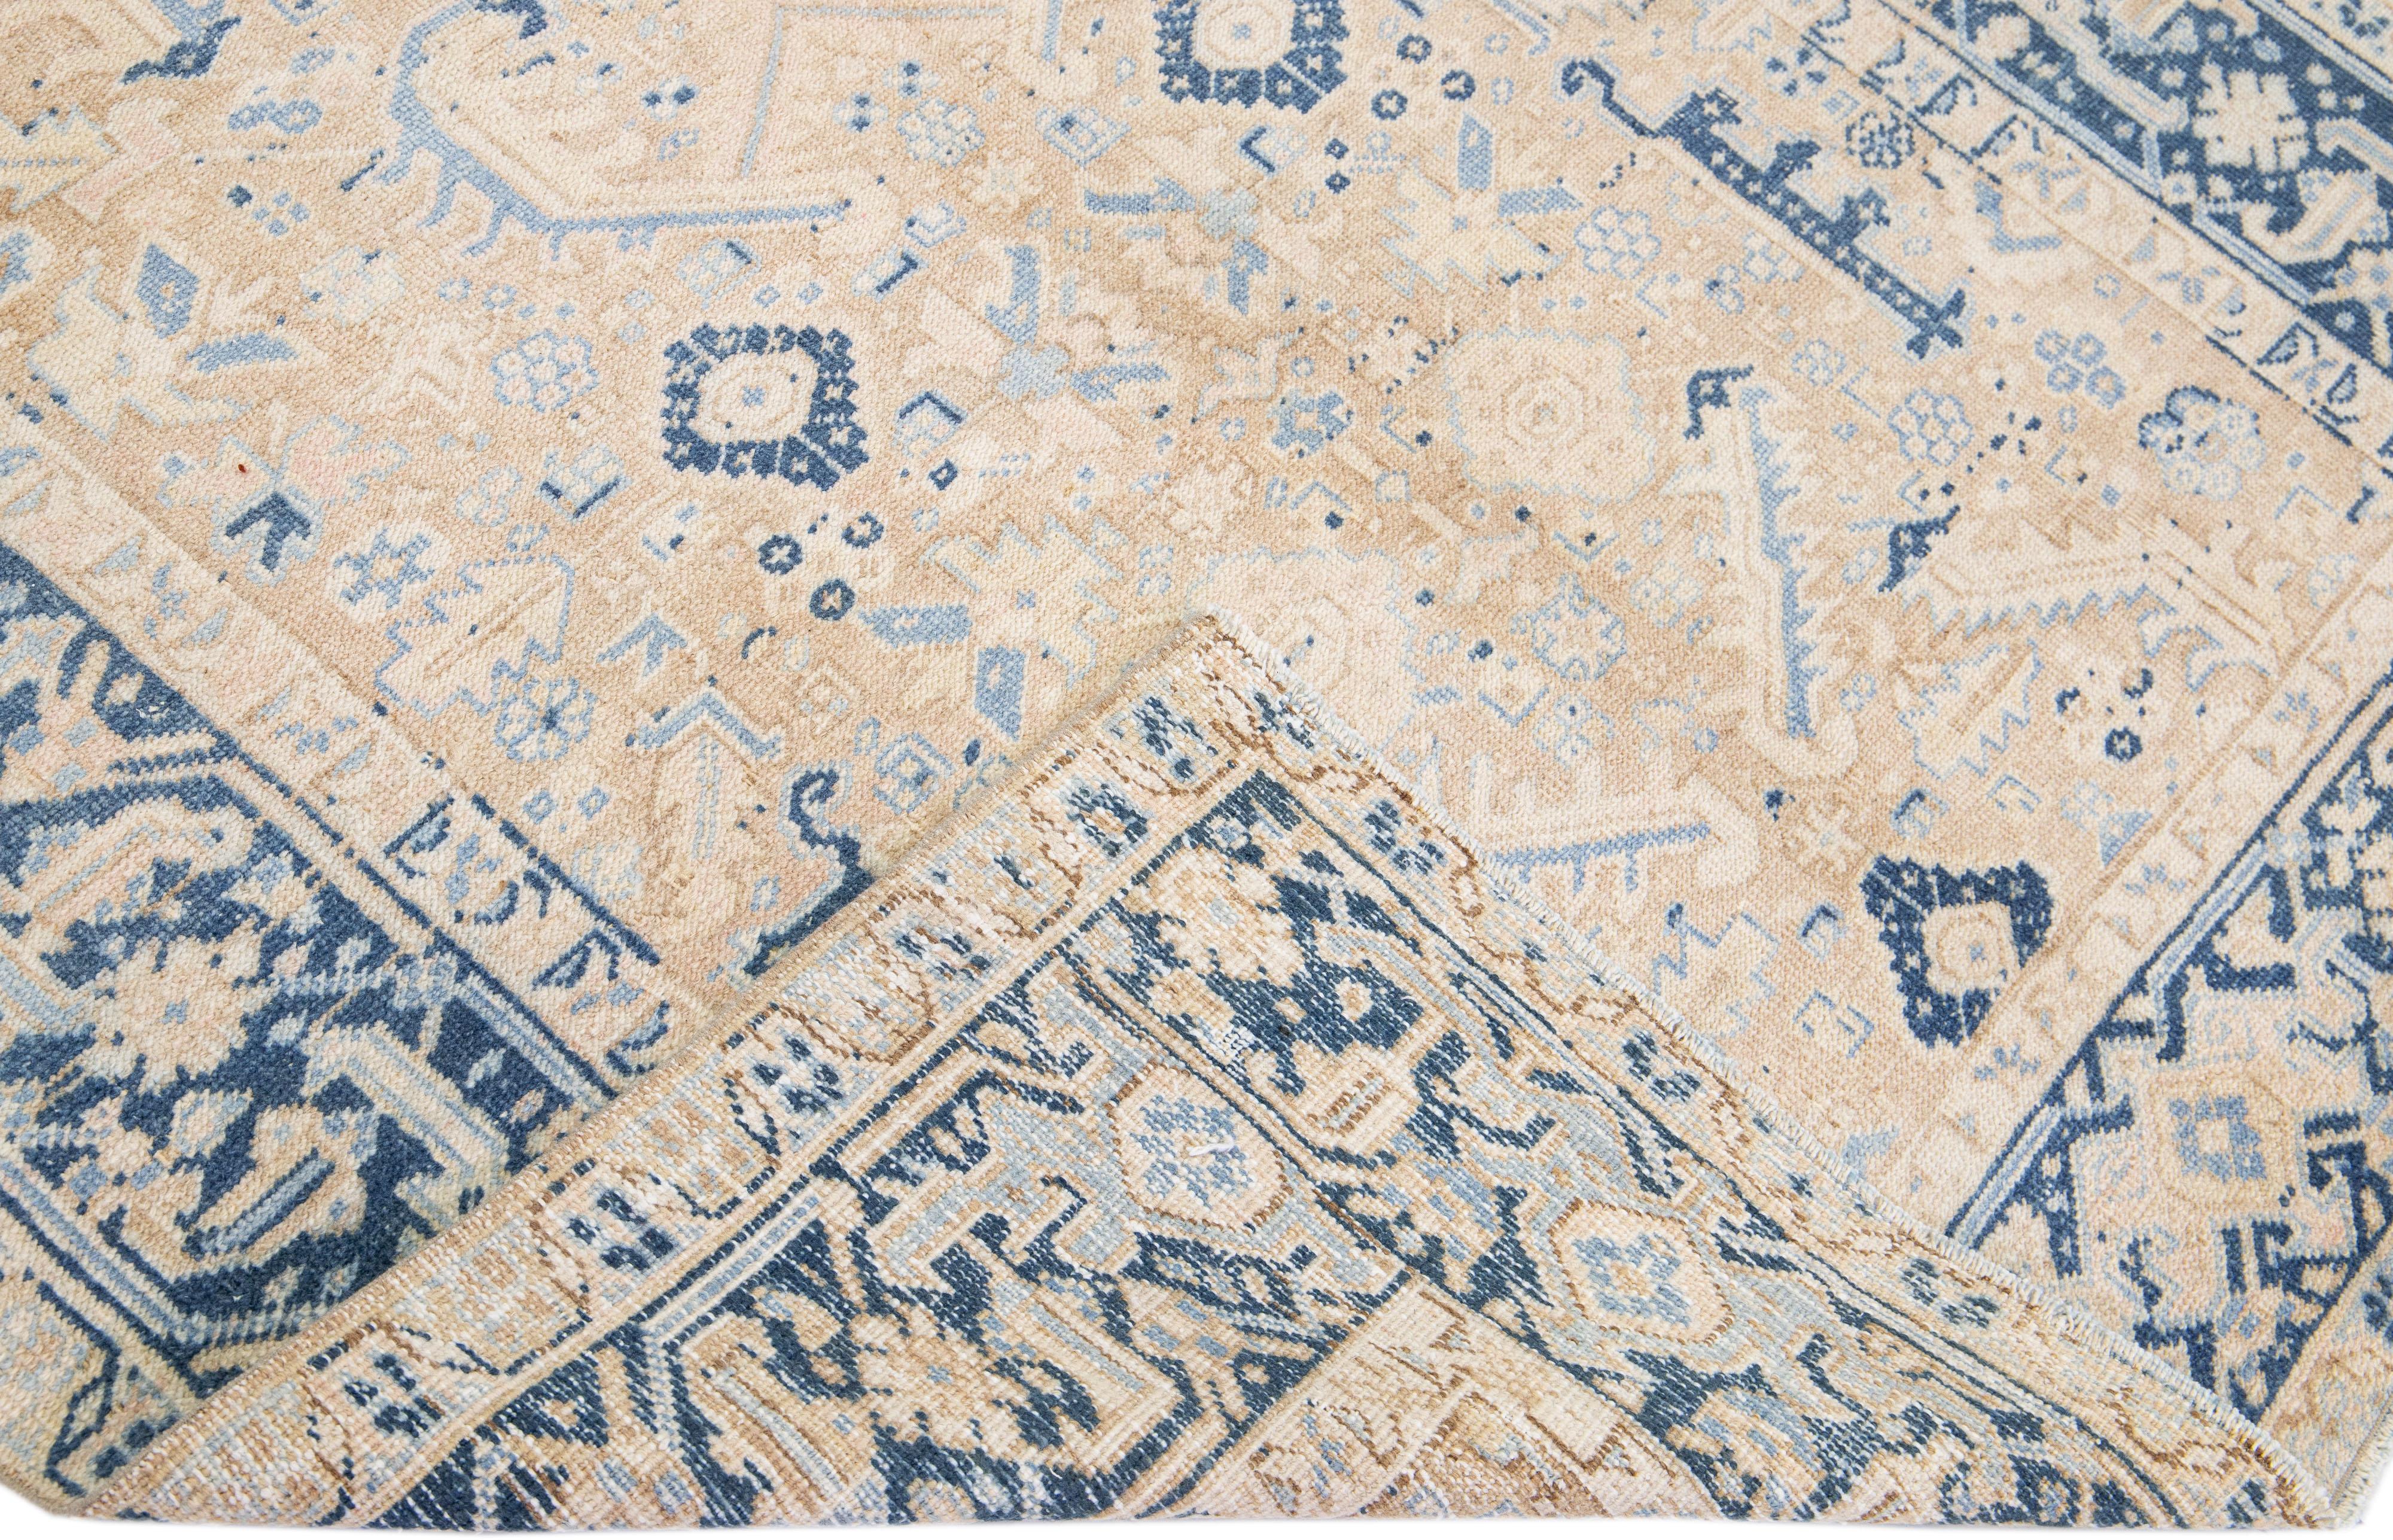 Beautiful antique Heriz hand-knotted wool rug with a beige color field. This Persian rug has a blue frame with tan accents in a gorgeous all-over geometric medallion design.

This rug measures: 5'10